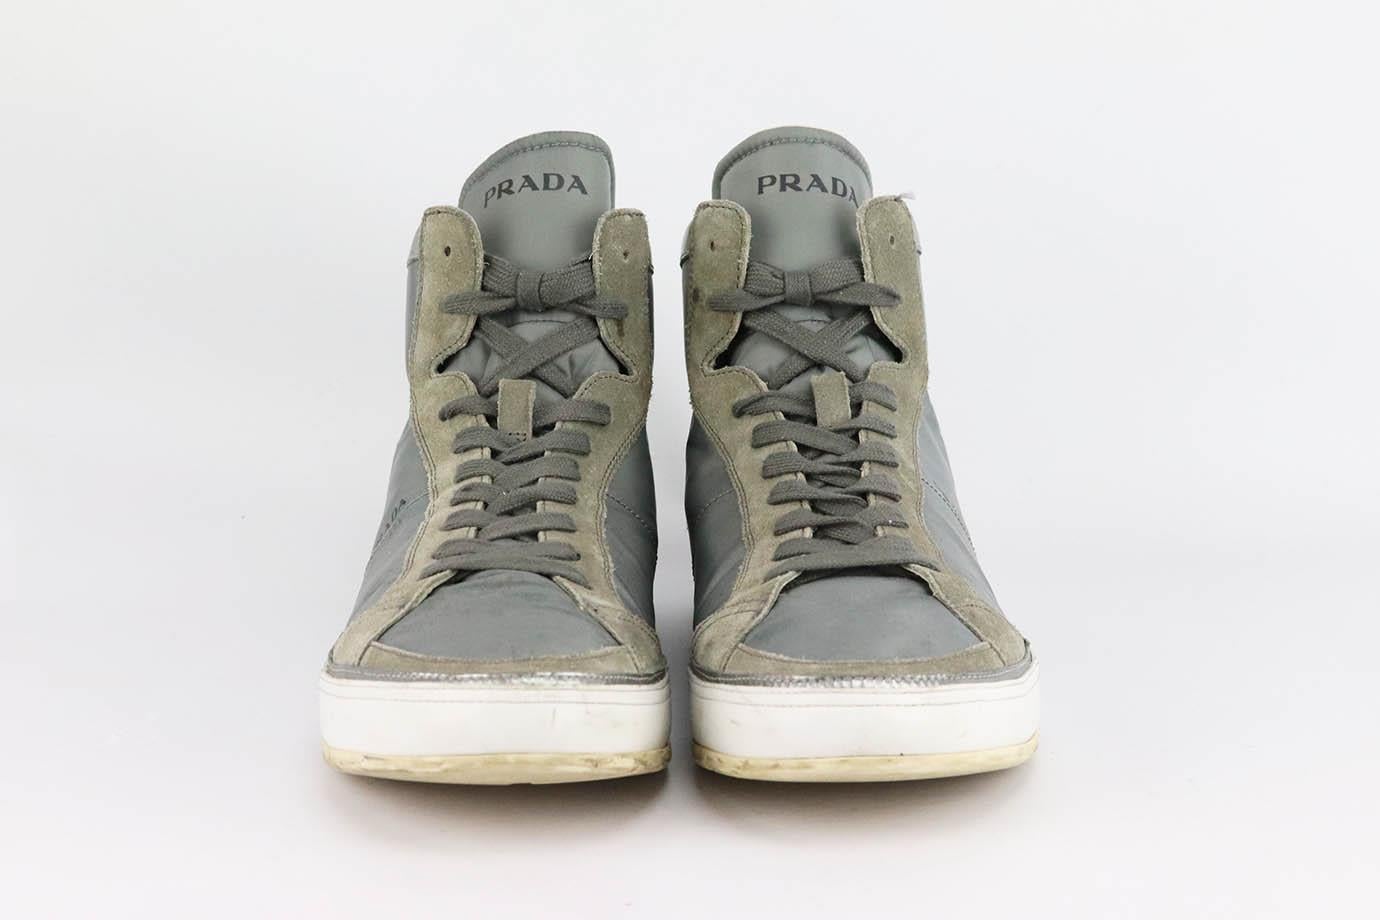 These high-top sneakers by Prada is just as cool as the last - they're made from breathable suede, leather and nylon and have padded collars and logo on the back. Rubber sole measures approximately 25 mm/ 1 inches. Grey nylon, grey suede, silver